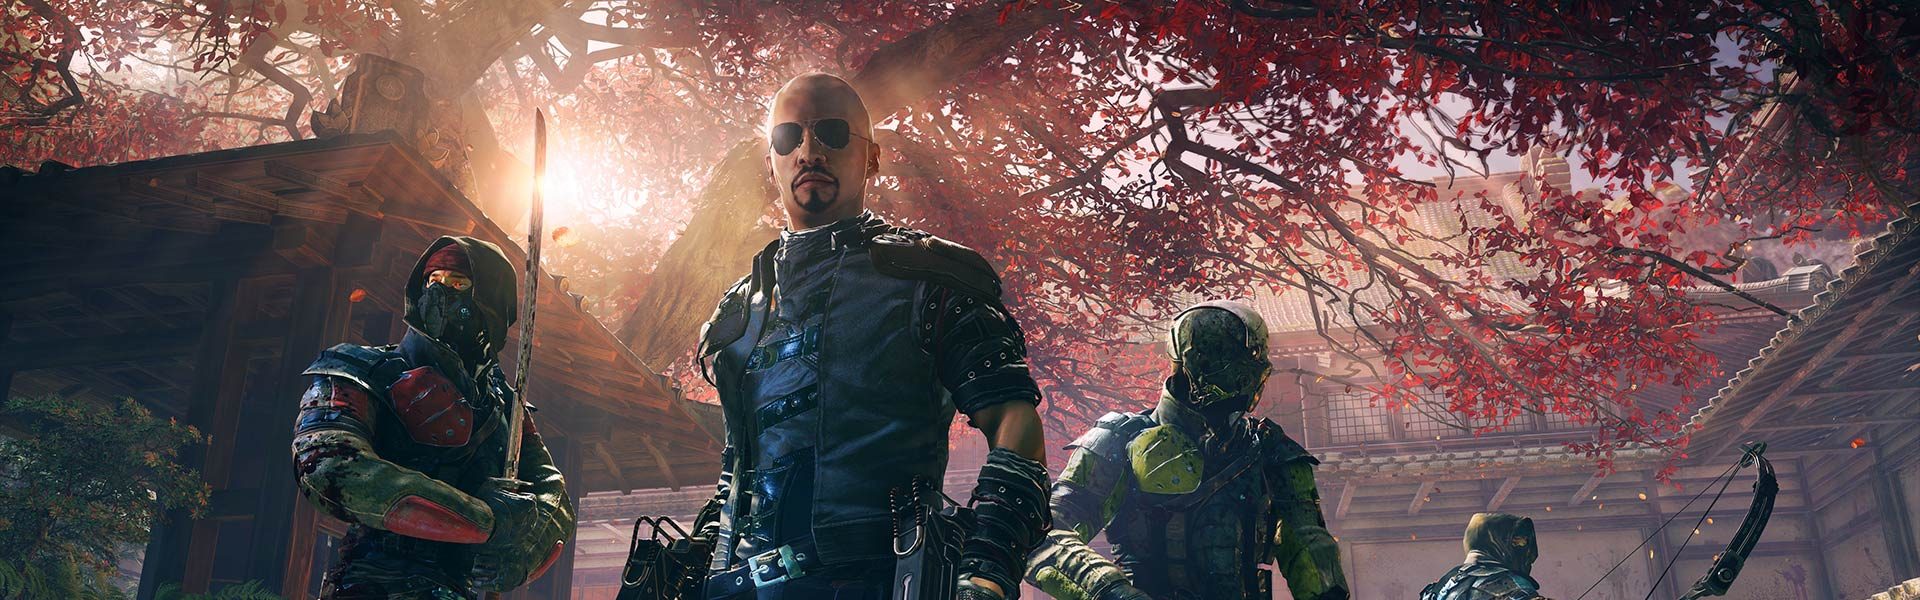 free download shadow warrior 2 ps4